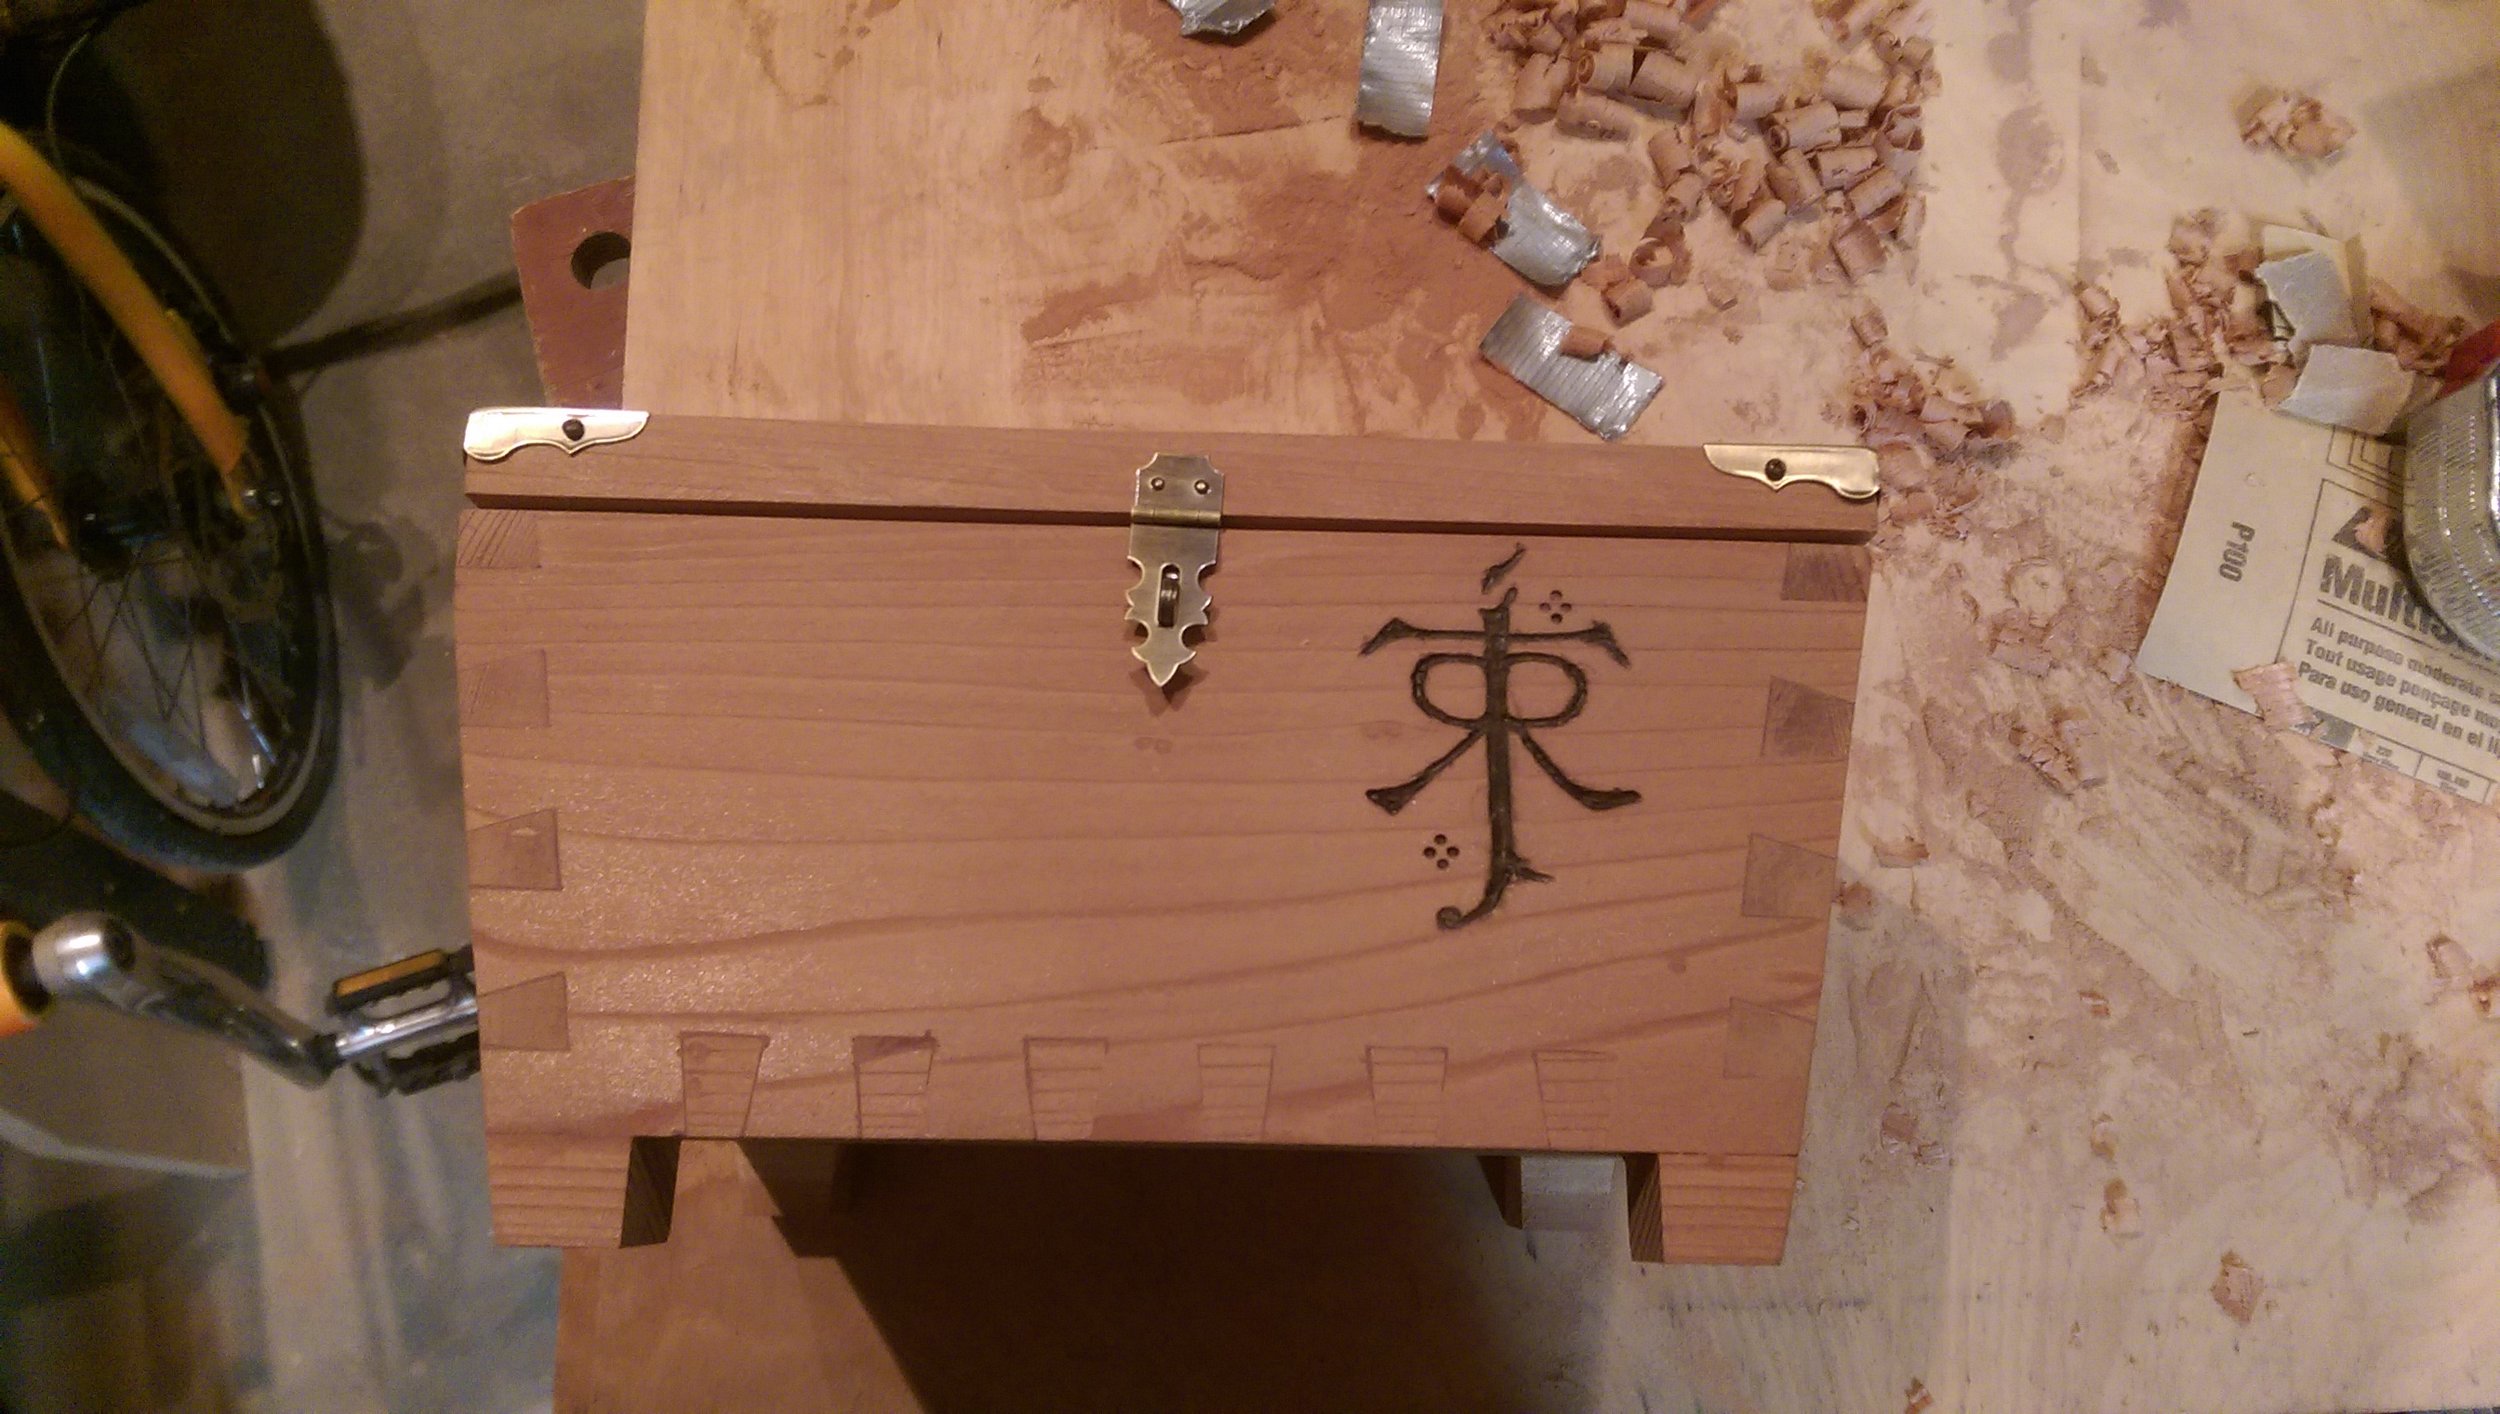  Here’s the box with the emblem completed 